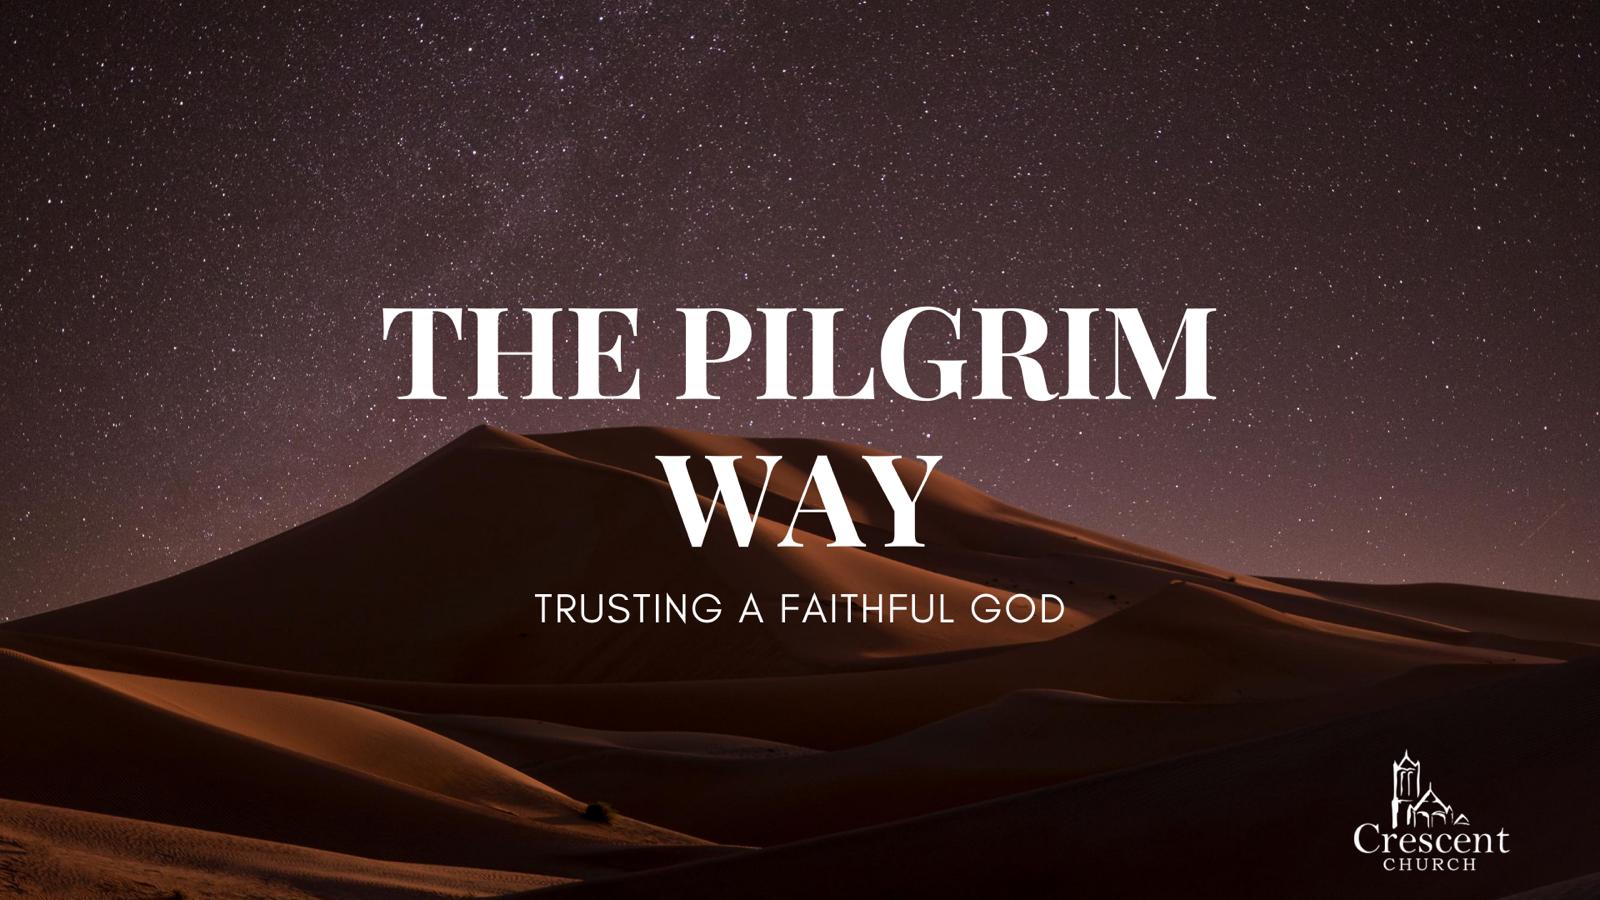 The Call to be a Pilgrim